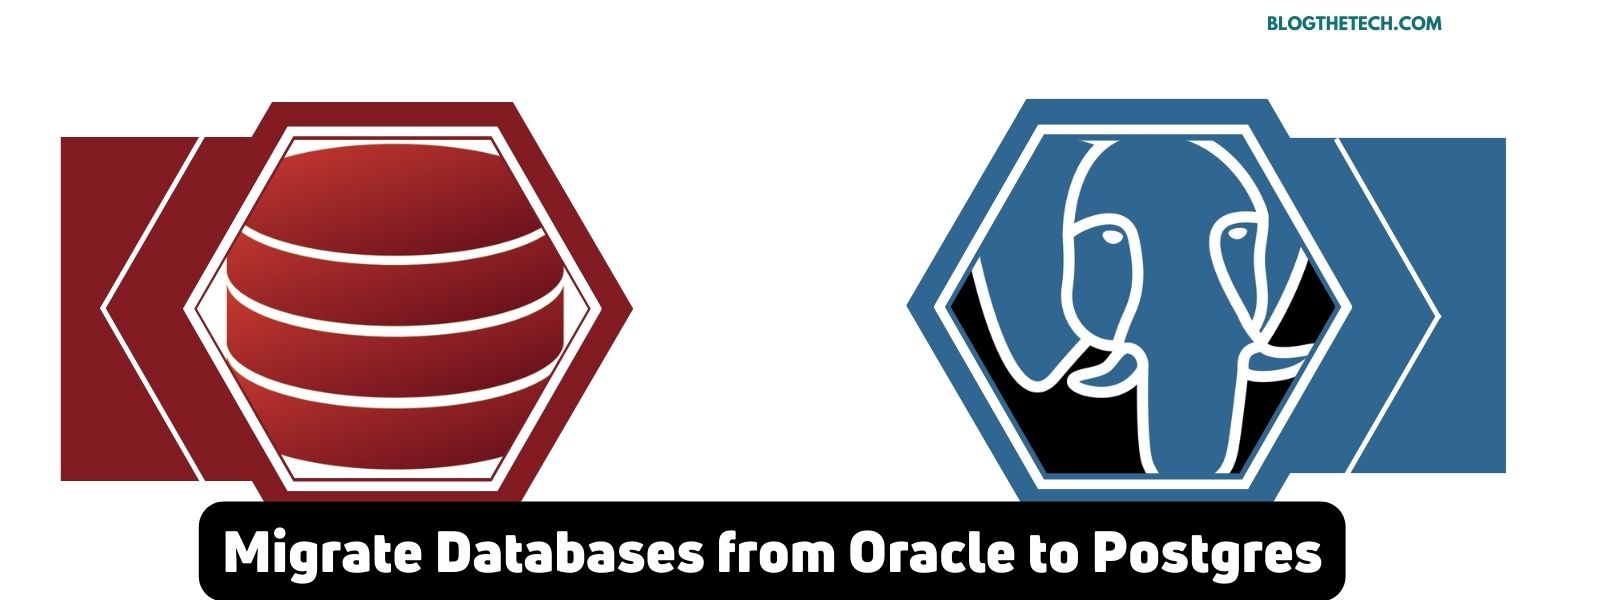 Migrate Databases from Oracle to Postgres